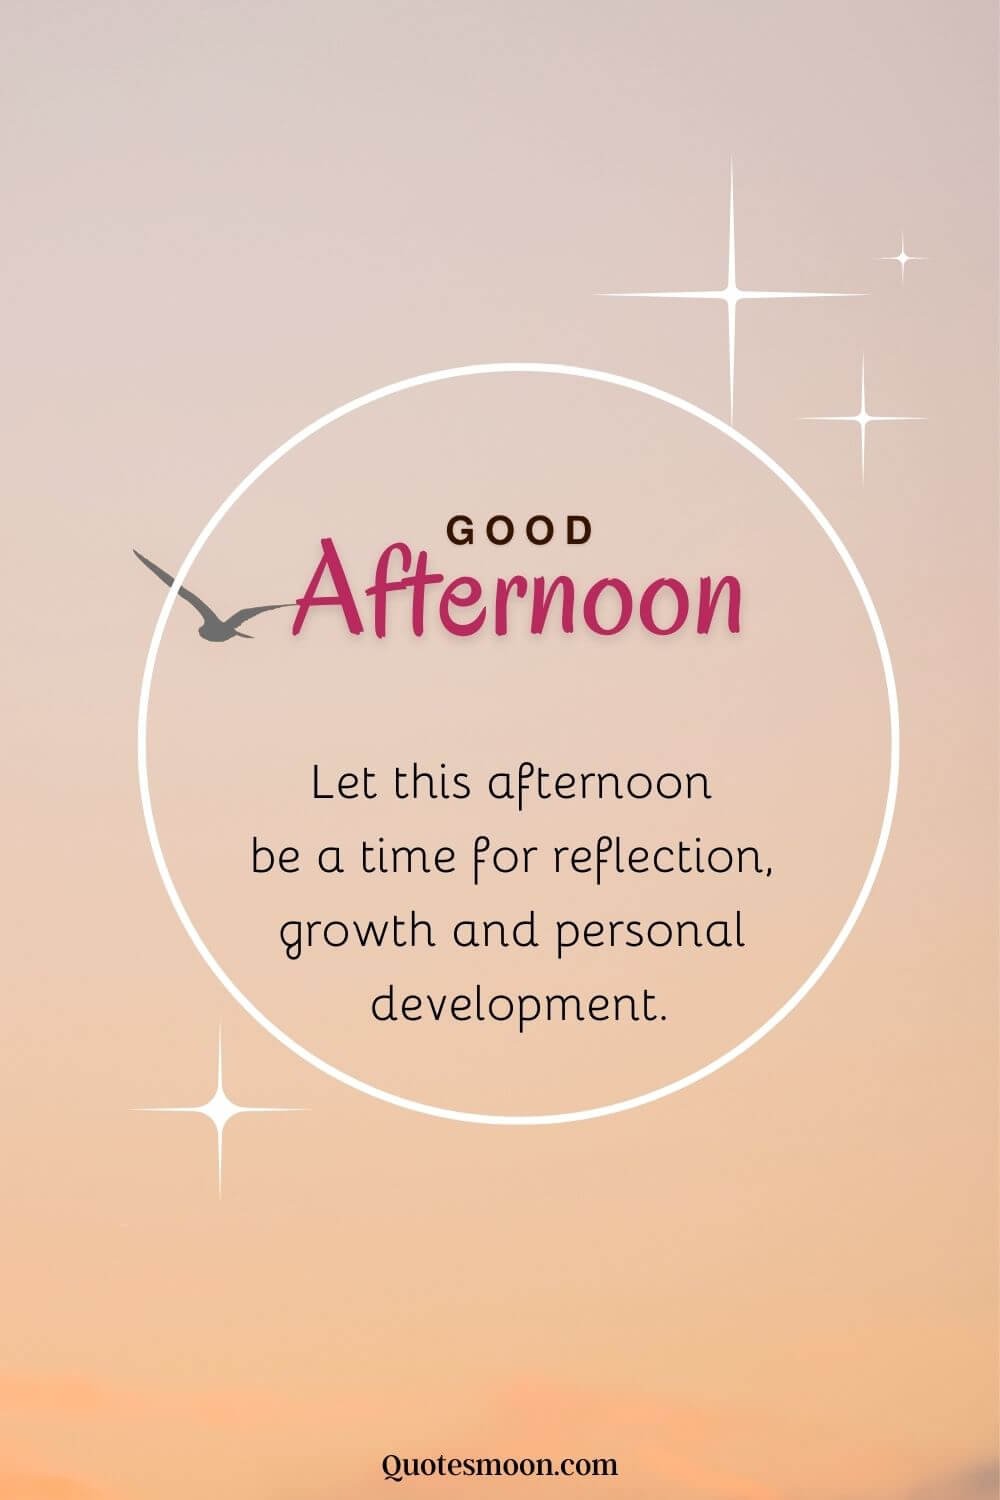 84 Good Afternoon Blessings And Inspirational Quotes - Quotesmoon